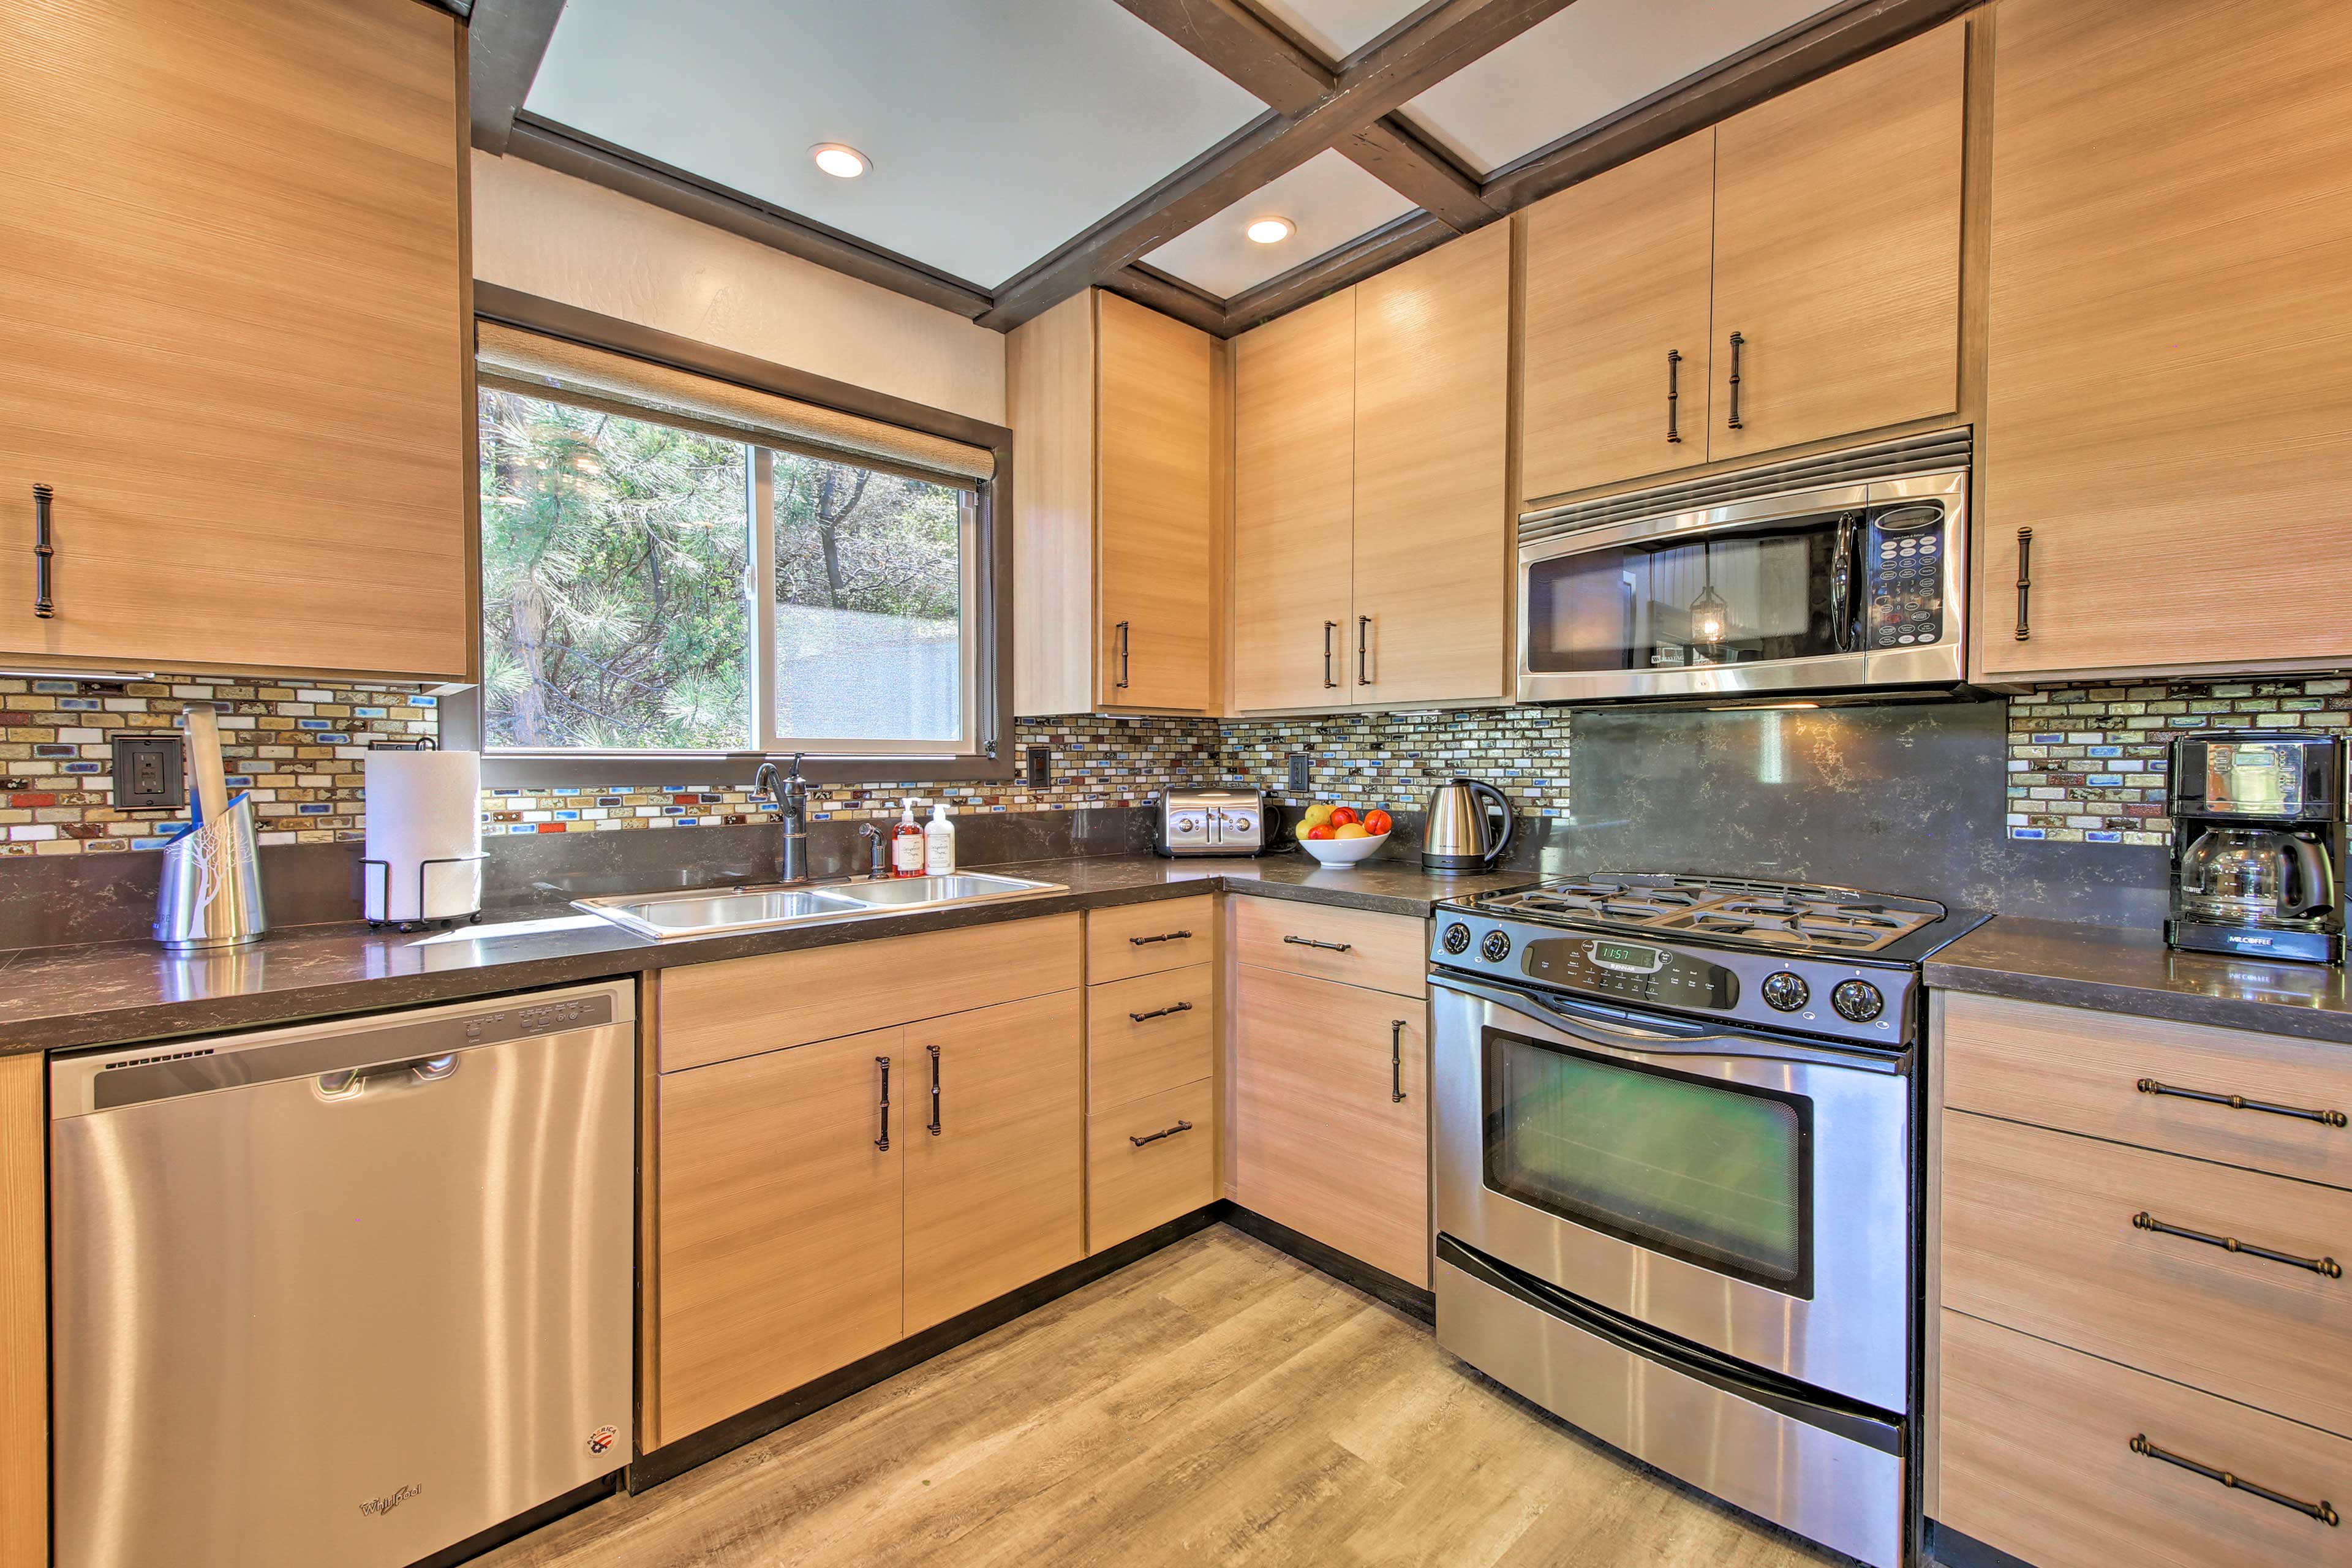 Stainless steel appliances highlight the kitchen.